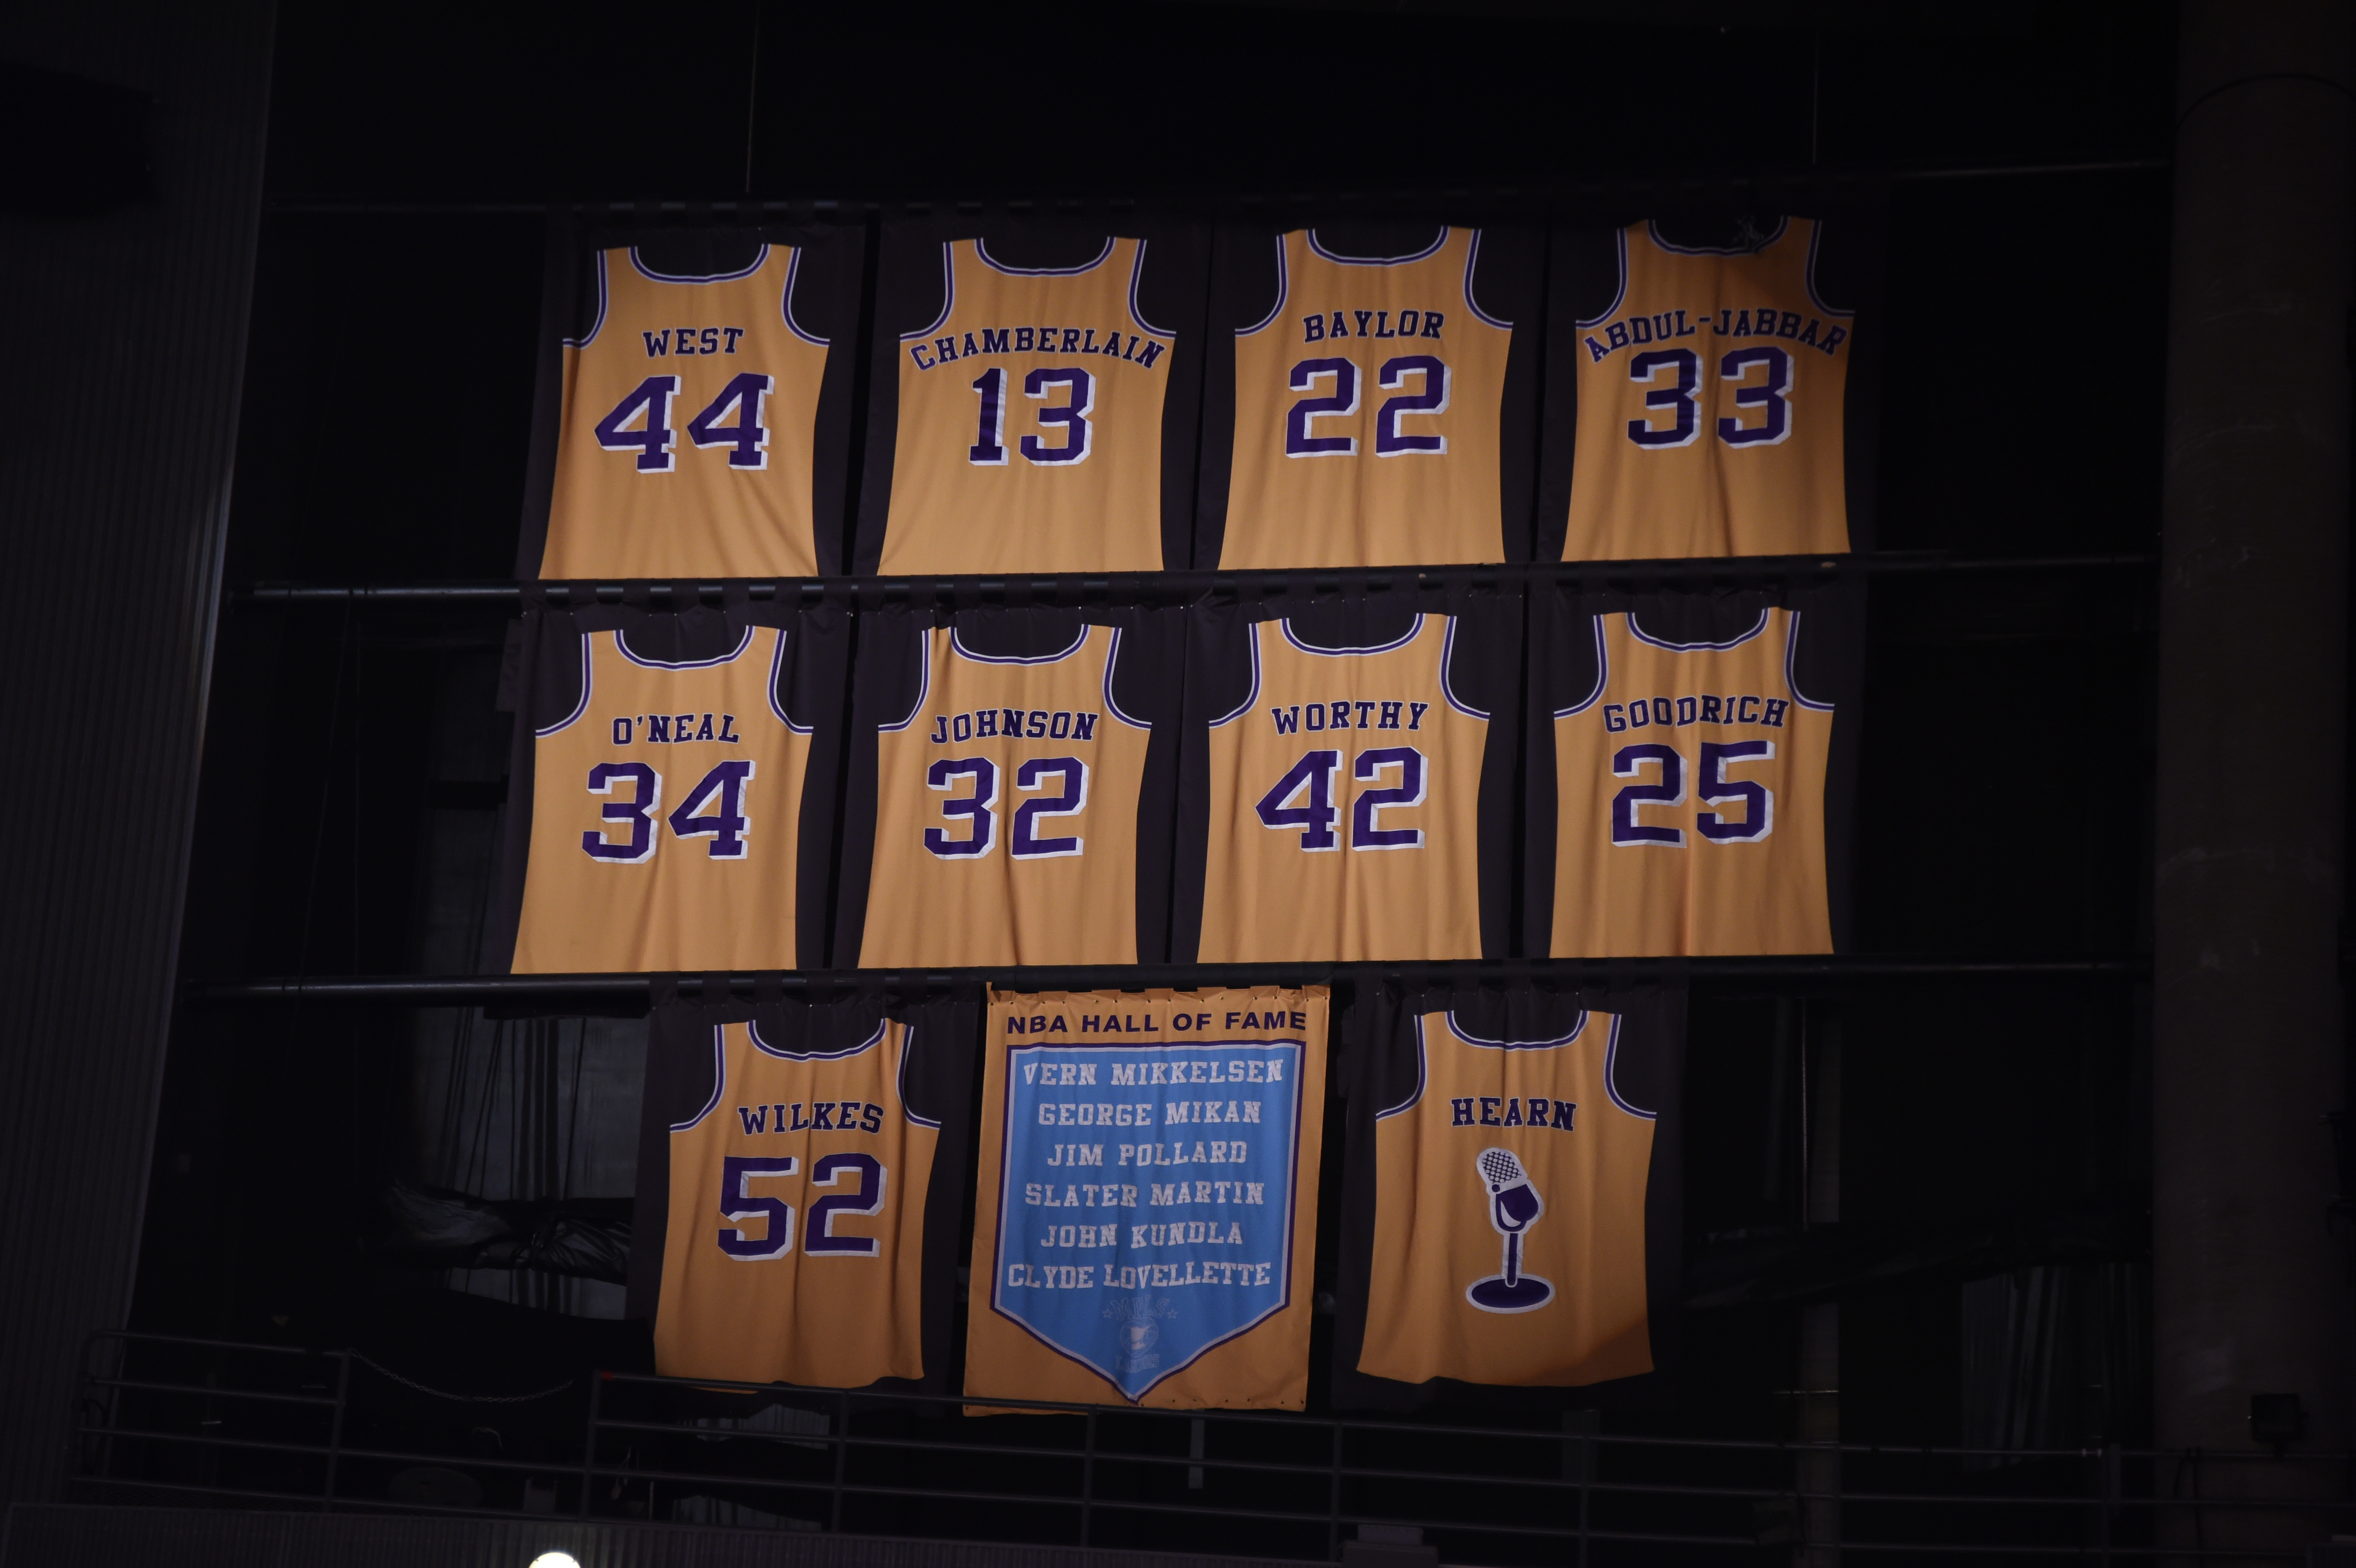 NBA official Champion 52 Lakers jersey #8 Bryant. Believe its a